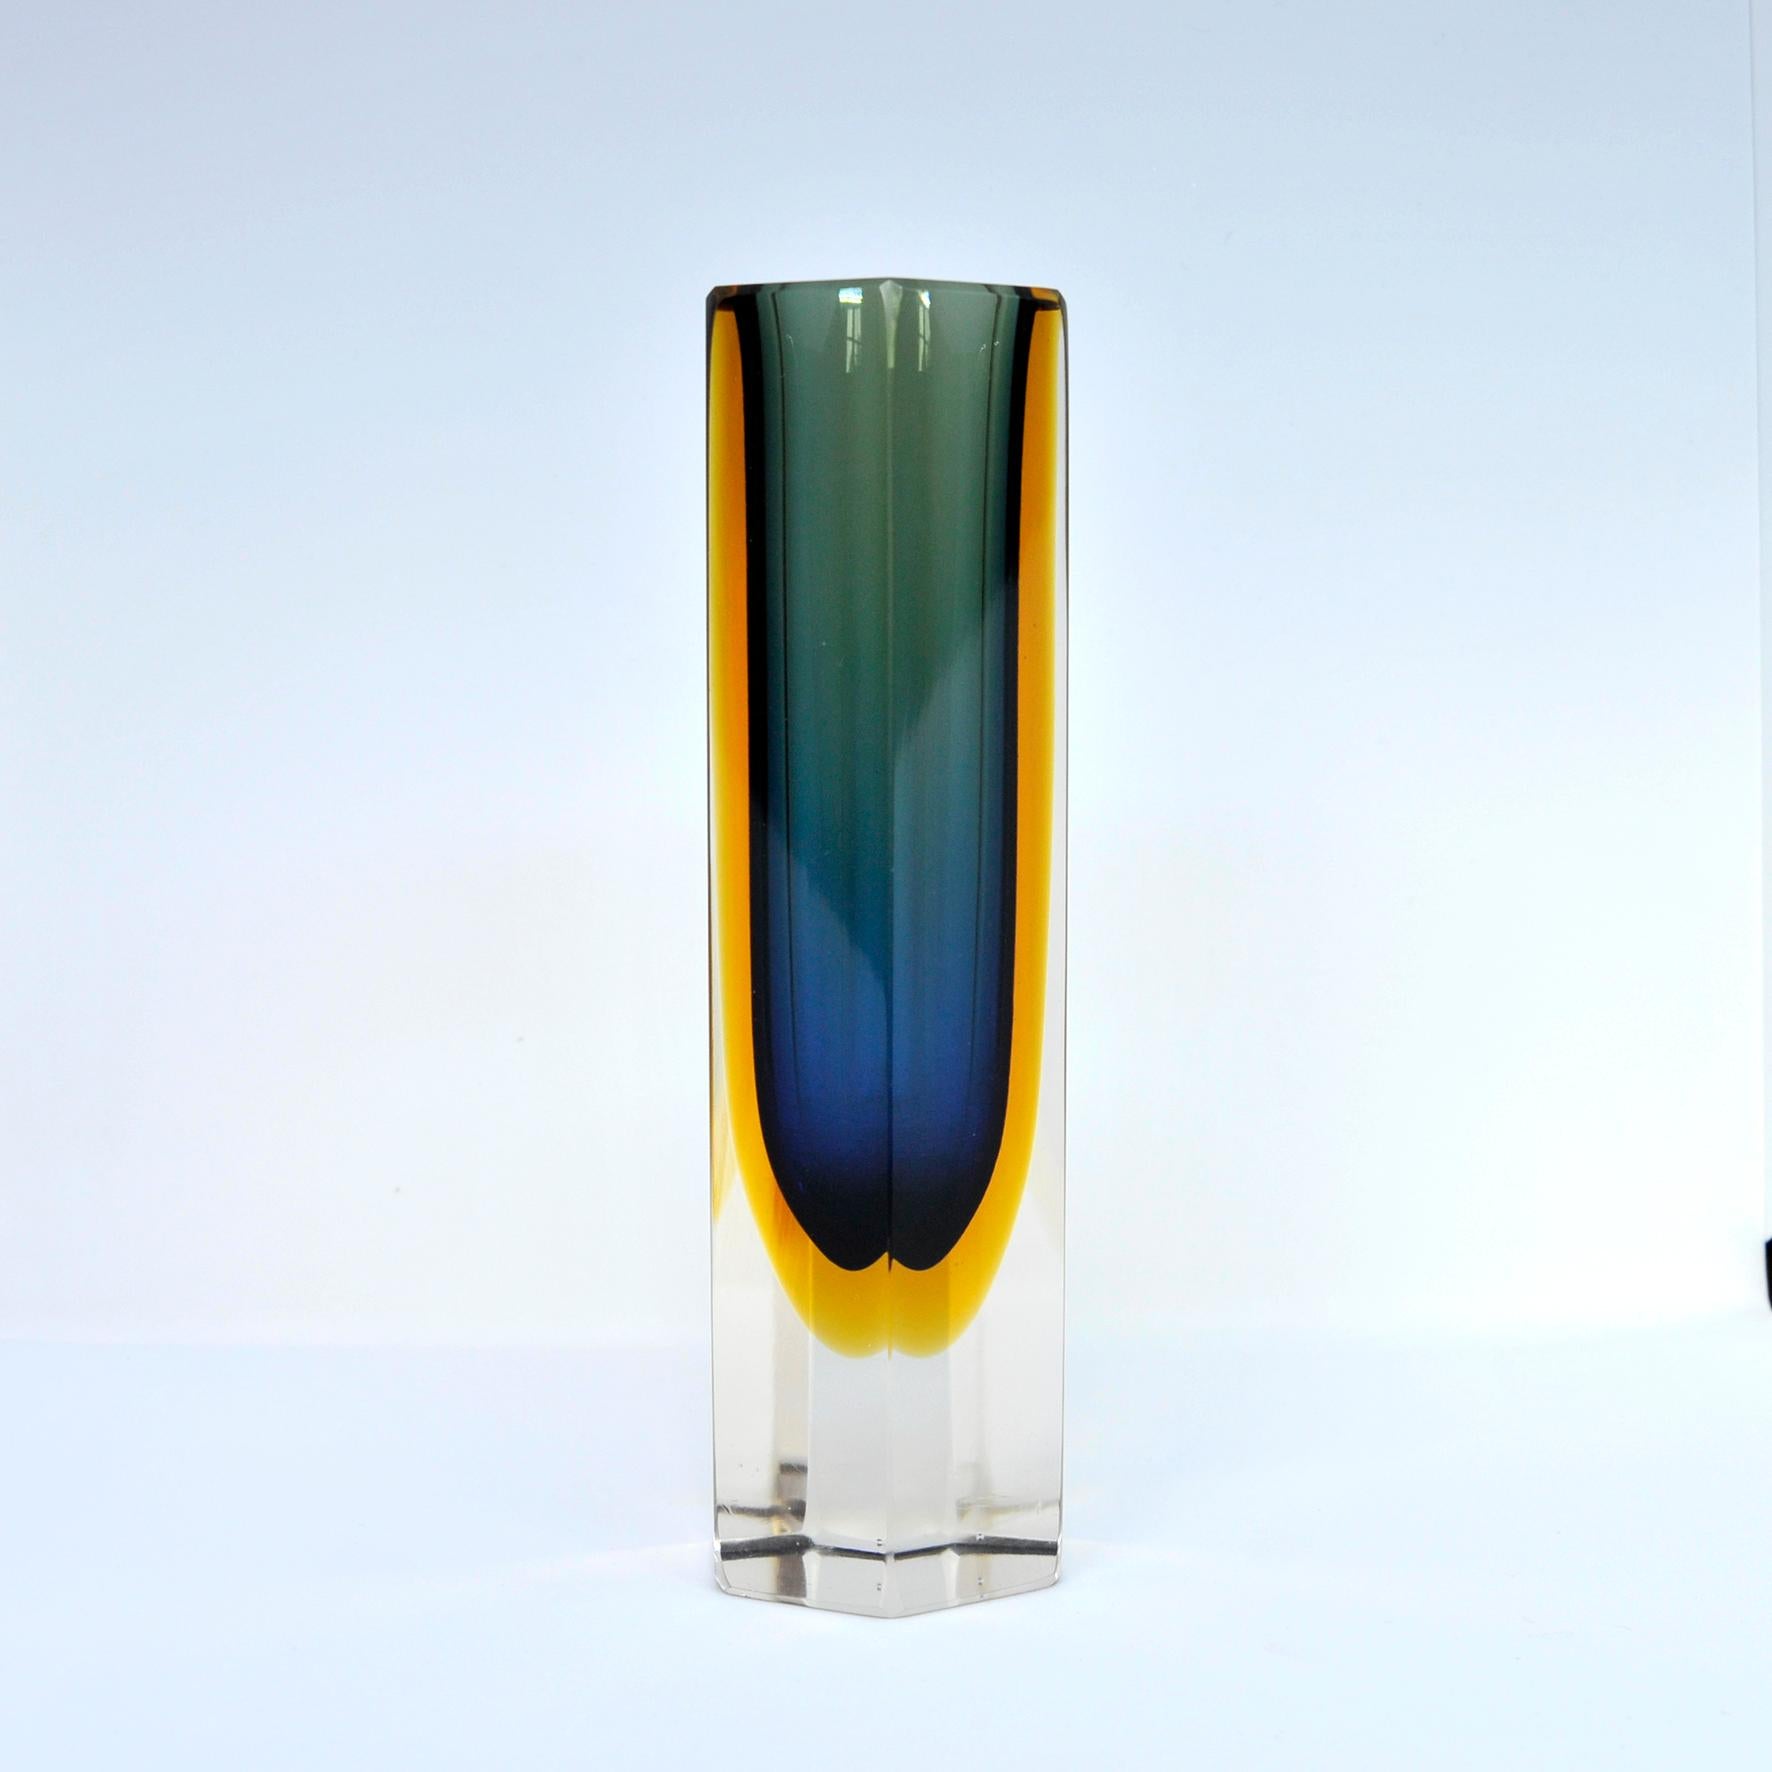 Unique Mid-Century Modern hexagon glass block by Flavio Poli. This handblown Murano vase has a wonderful Sommerso decoration and superb coloring in dark teal/amber.